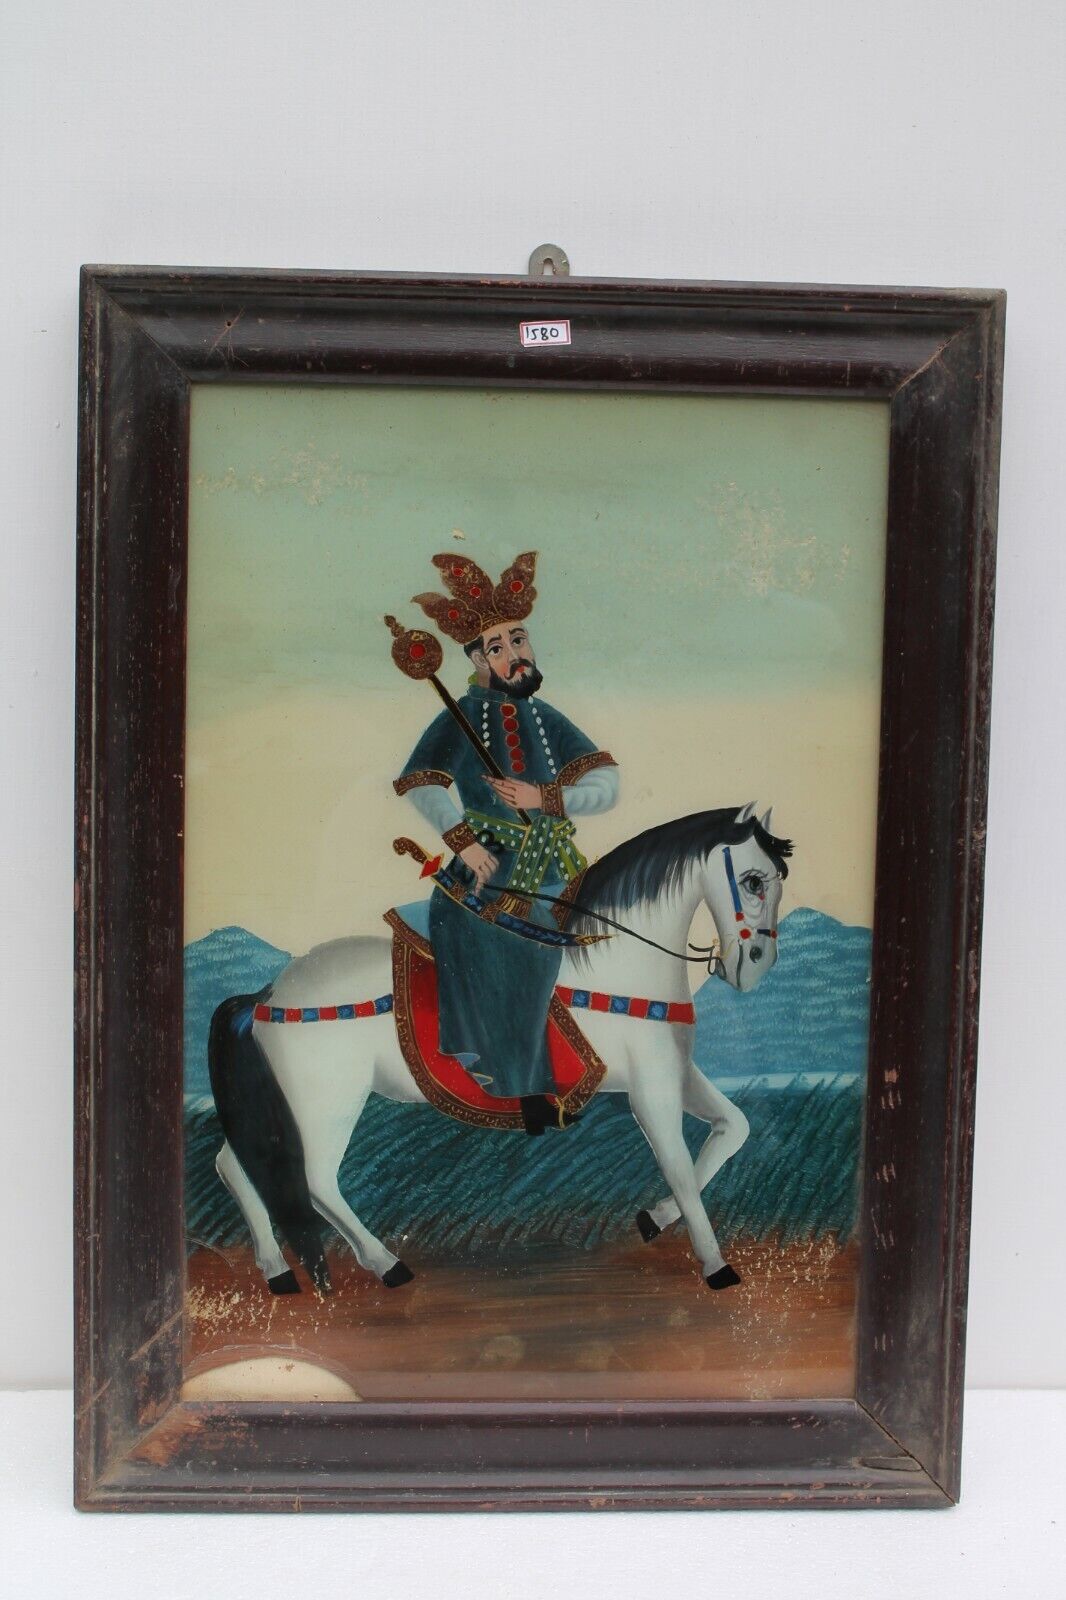 Vintage Old Hand Painted Indian Mughal Persian King Fine Glass Painting NH1580